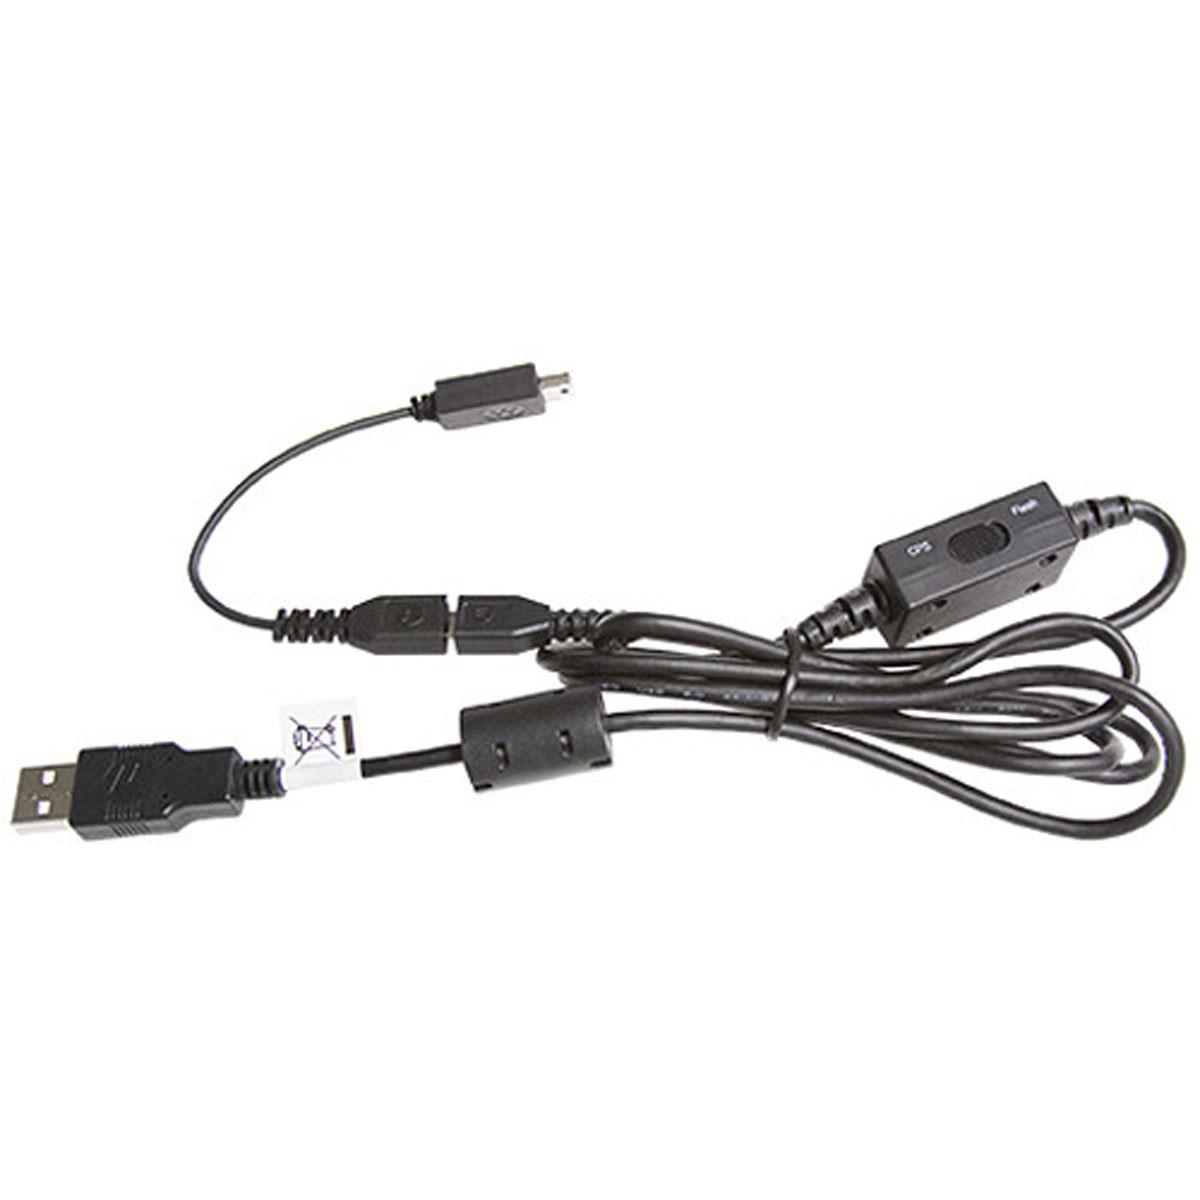 Image of Motorola 52.0&quot; CPS Programming Cable for RM Series Radio's